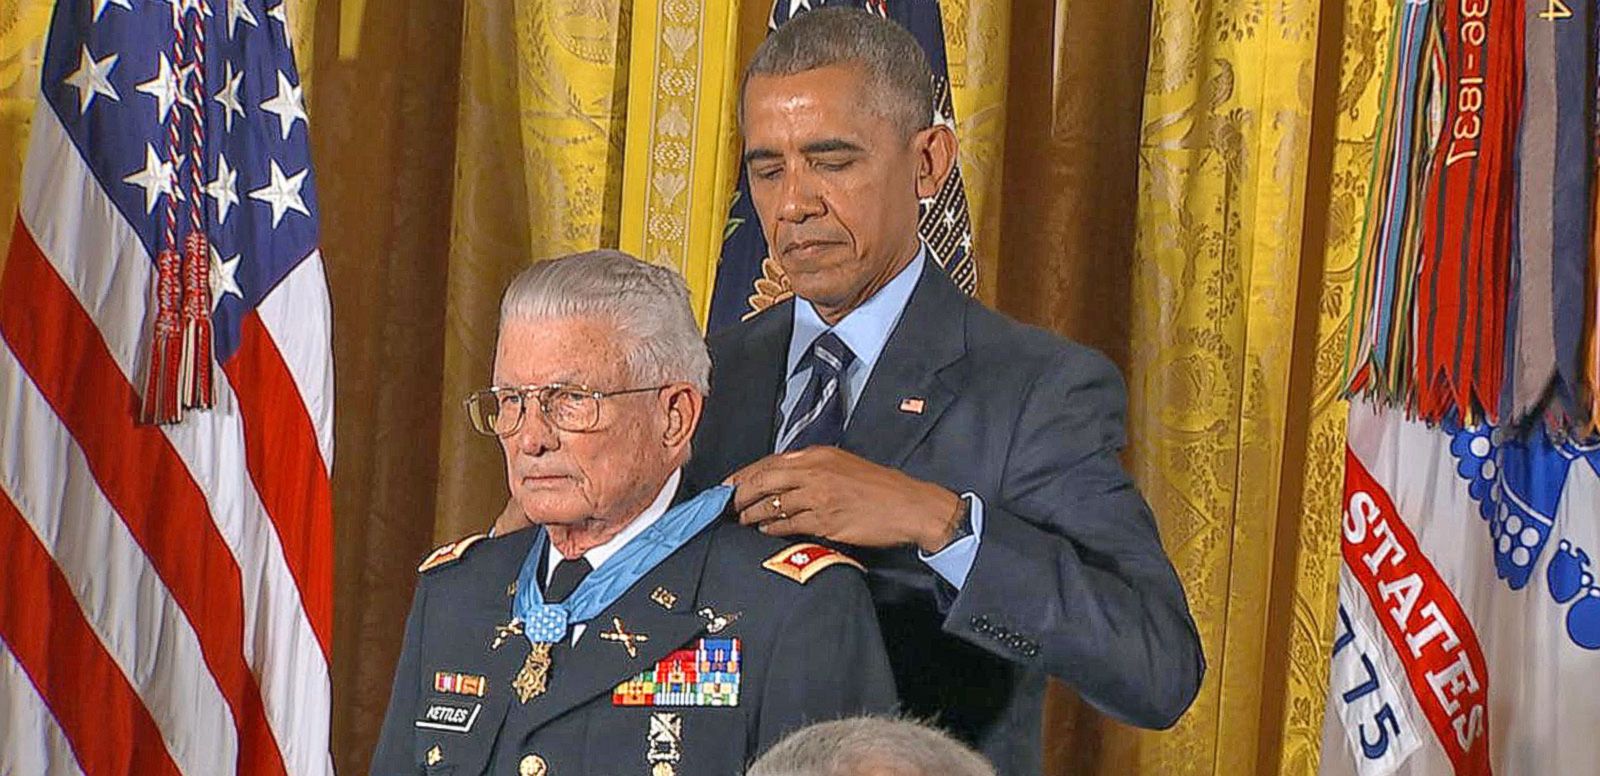 do medal of honor ceremonies make you cry